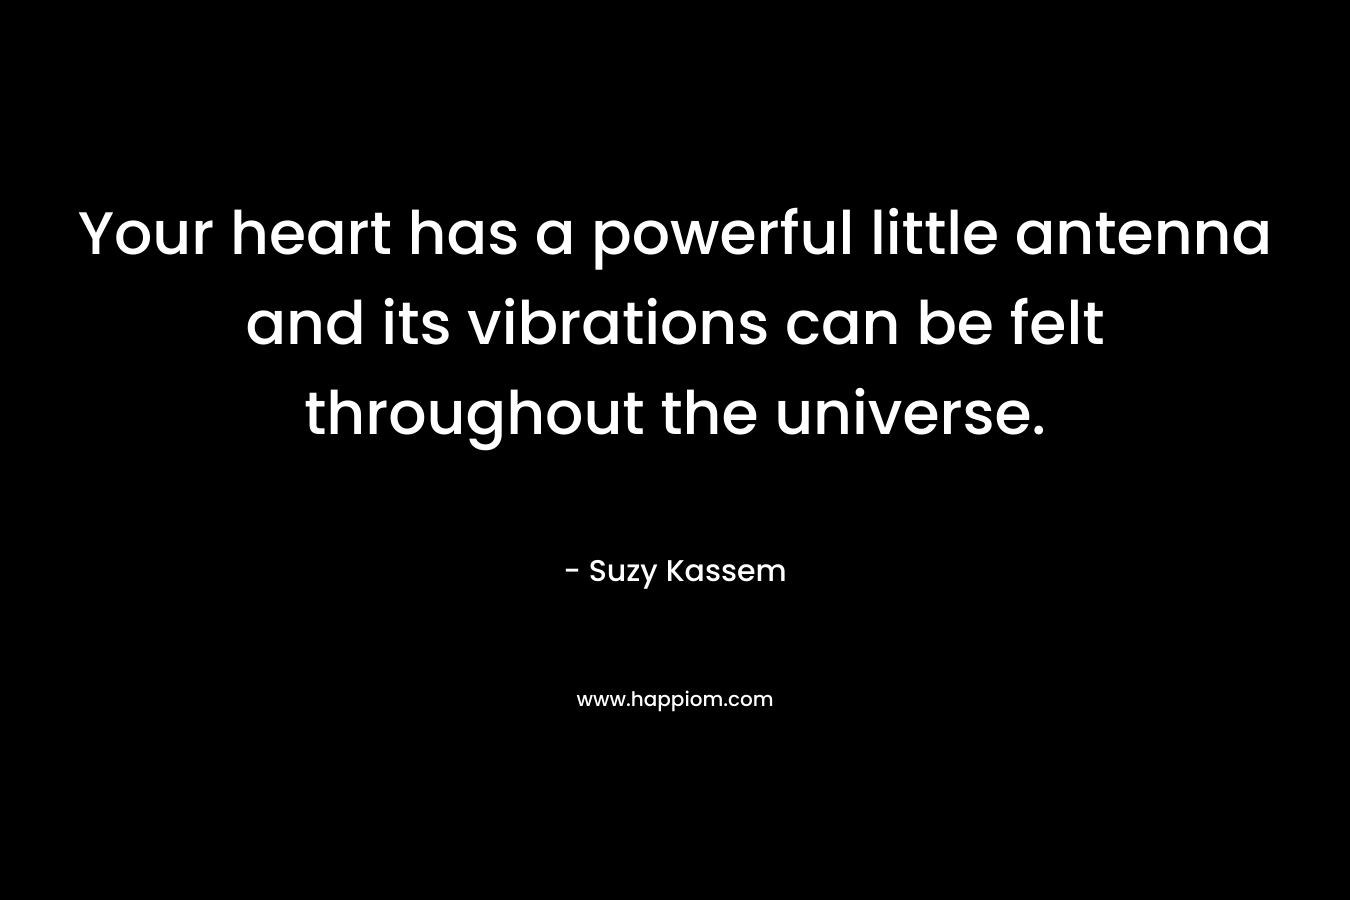 Your heart has a powerful little antenna and its vibrations can be felt throughout the universe.